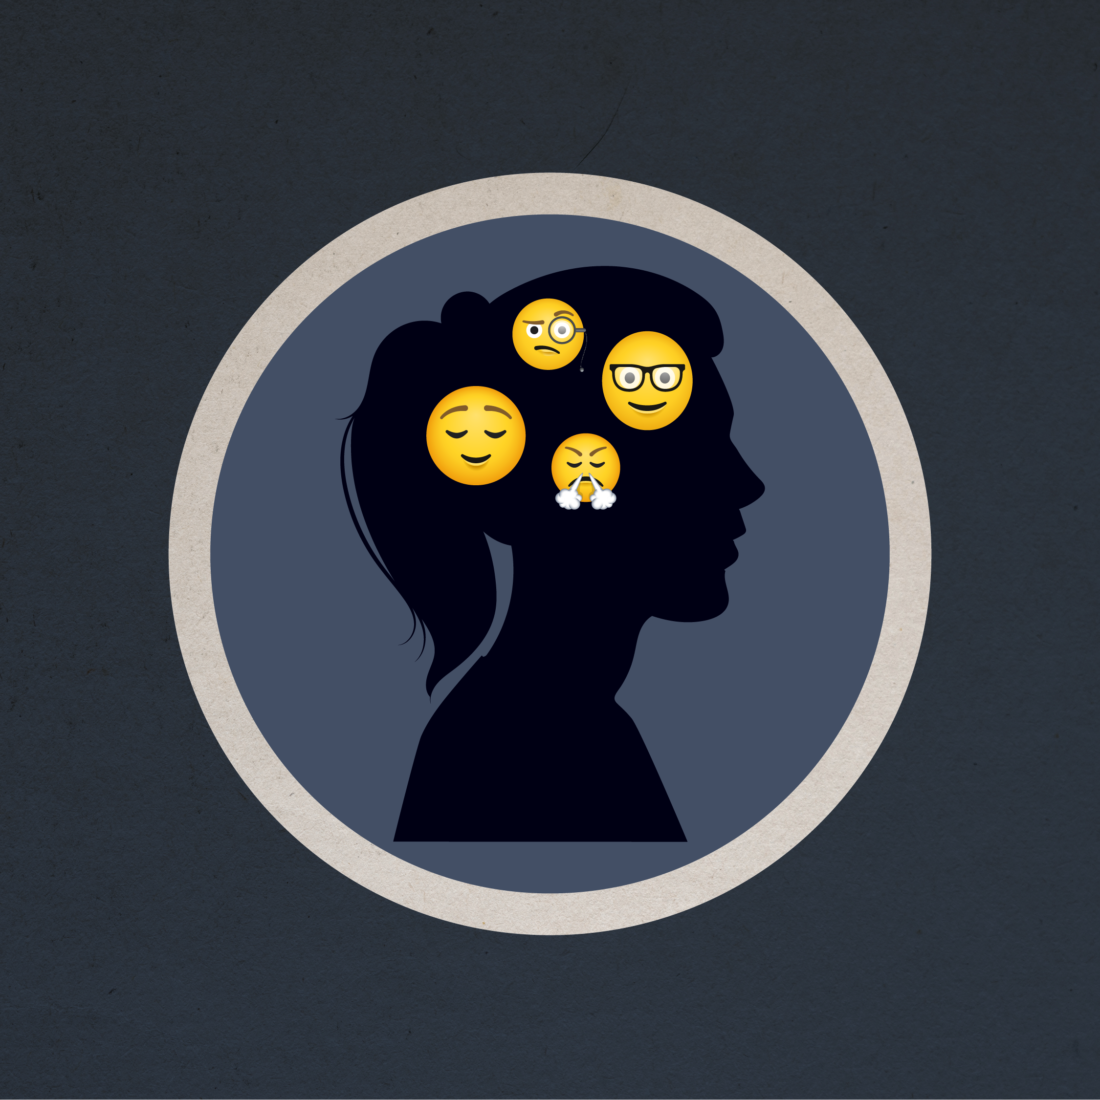 Emojis depict a range of emotions in a woman's head as she prepares fo ra phone screen interview.